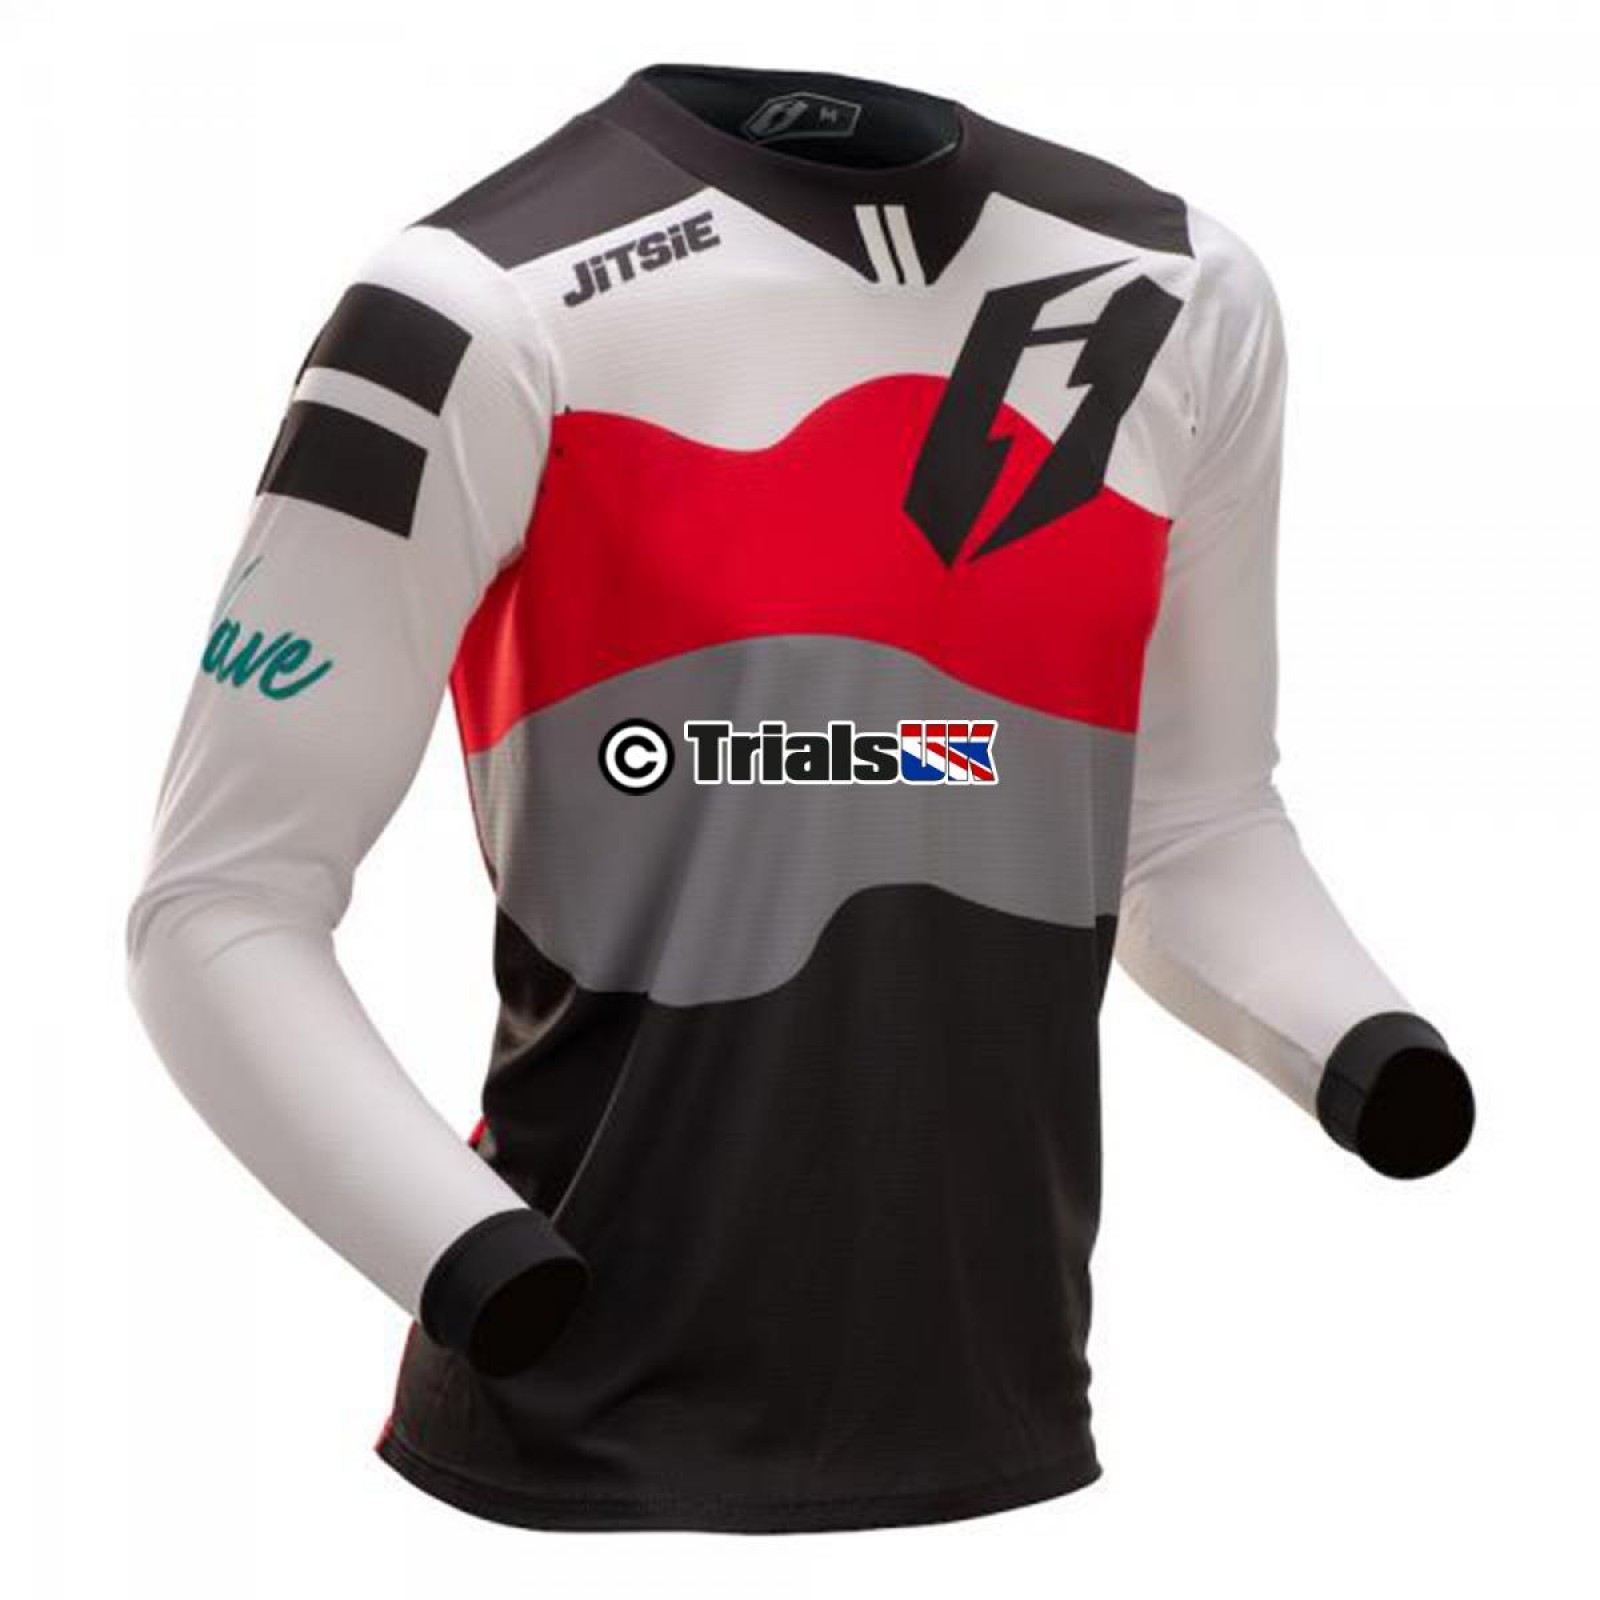 In 2 Colour Ways Jitsie 2019 Limited Edition WAVE Trials Riding Shirt